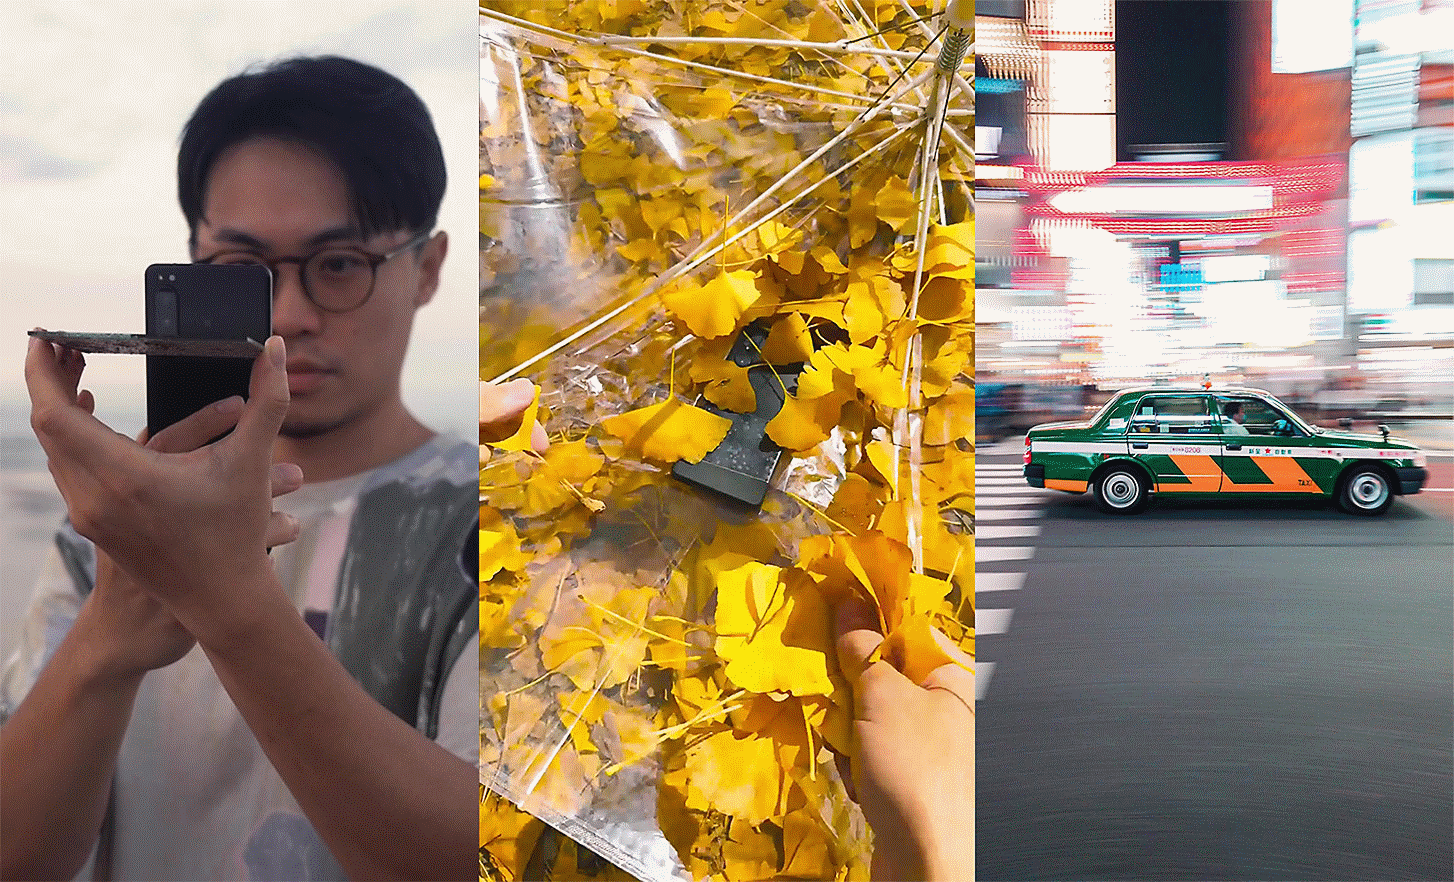 Three portraits side by side, on the left person taking a photograph, in the middle image of phone in between leaves and on the right car on city road